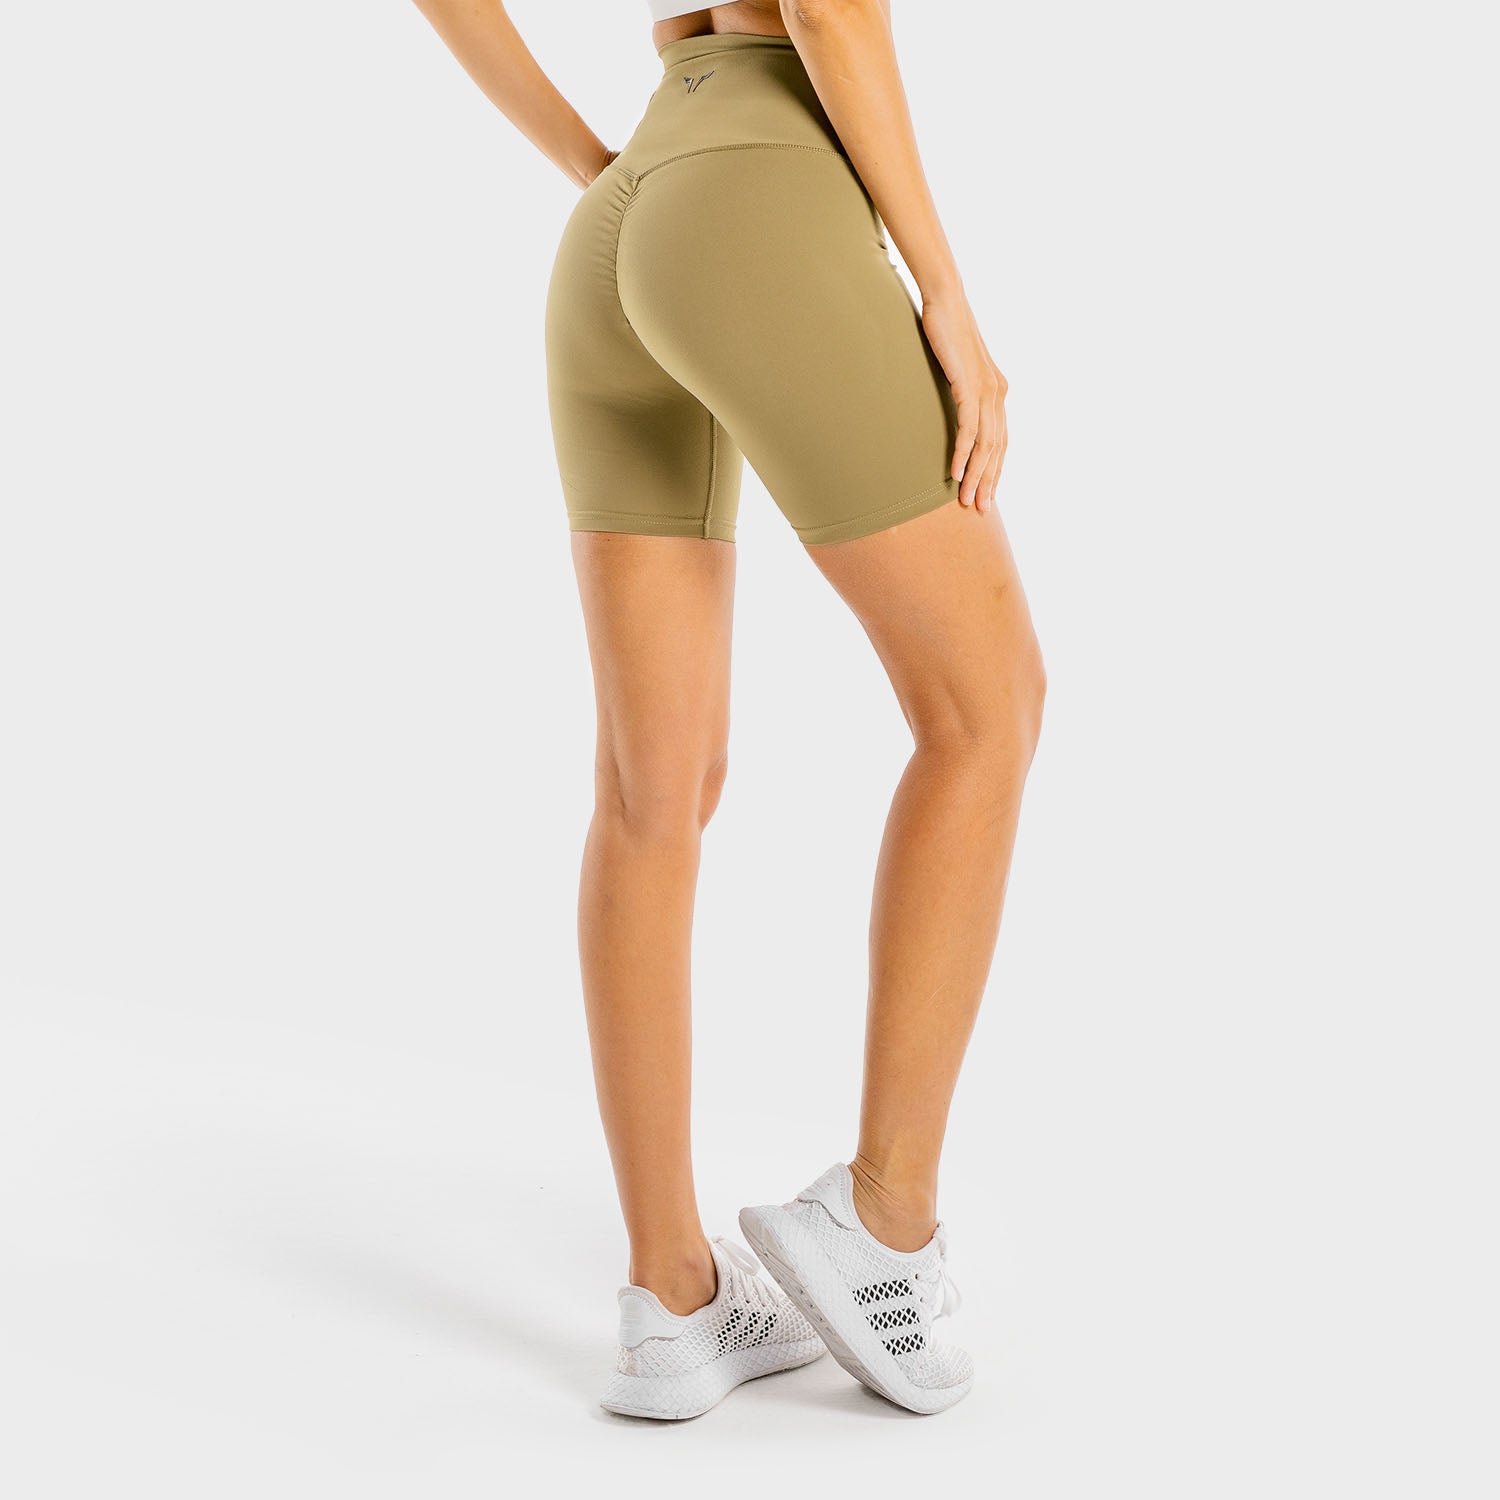 squatwolf-shorts-for-women-vibe-cycling-shorts-nude-workout-clothes